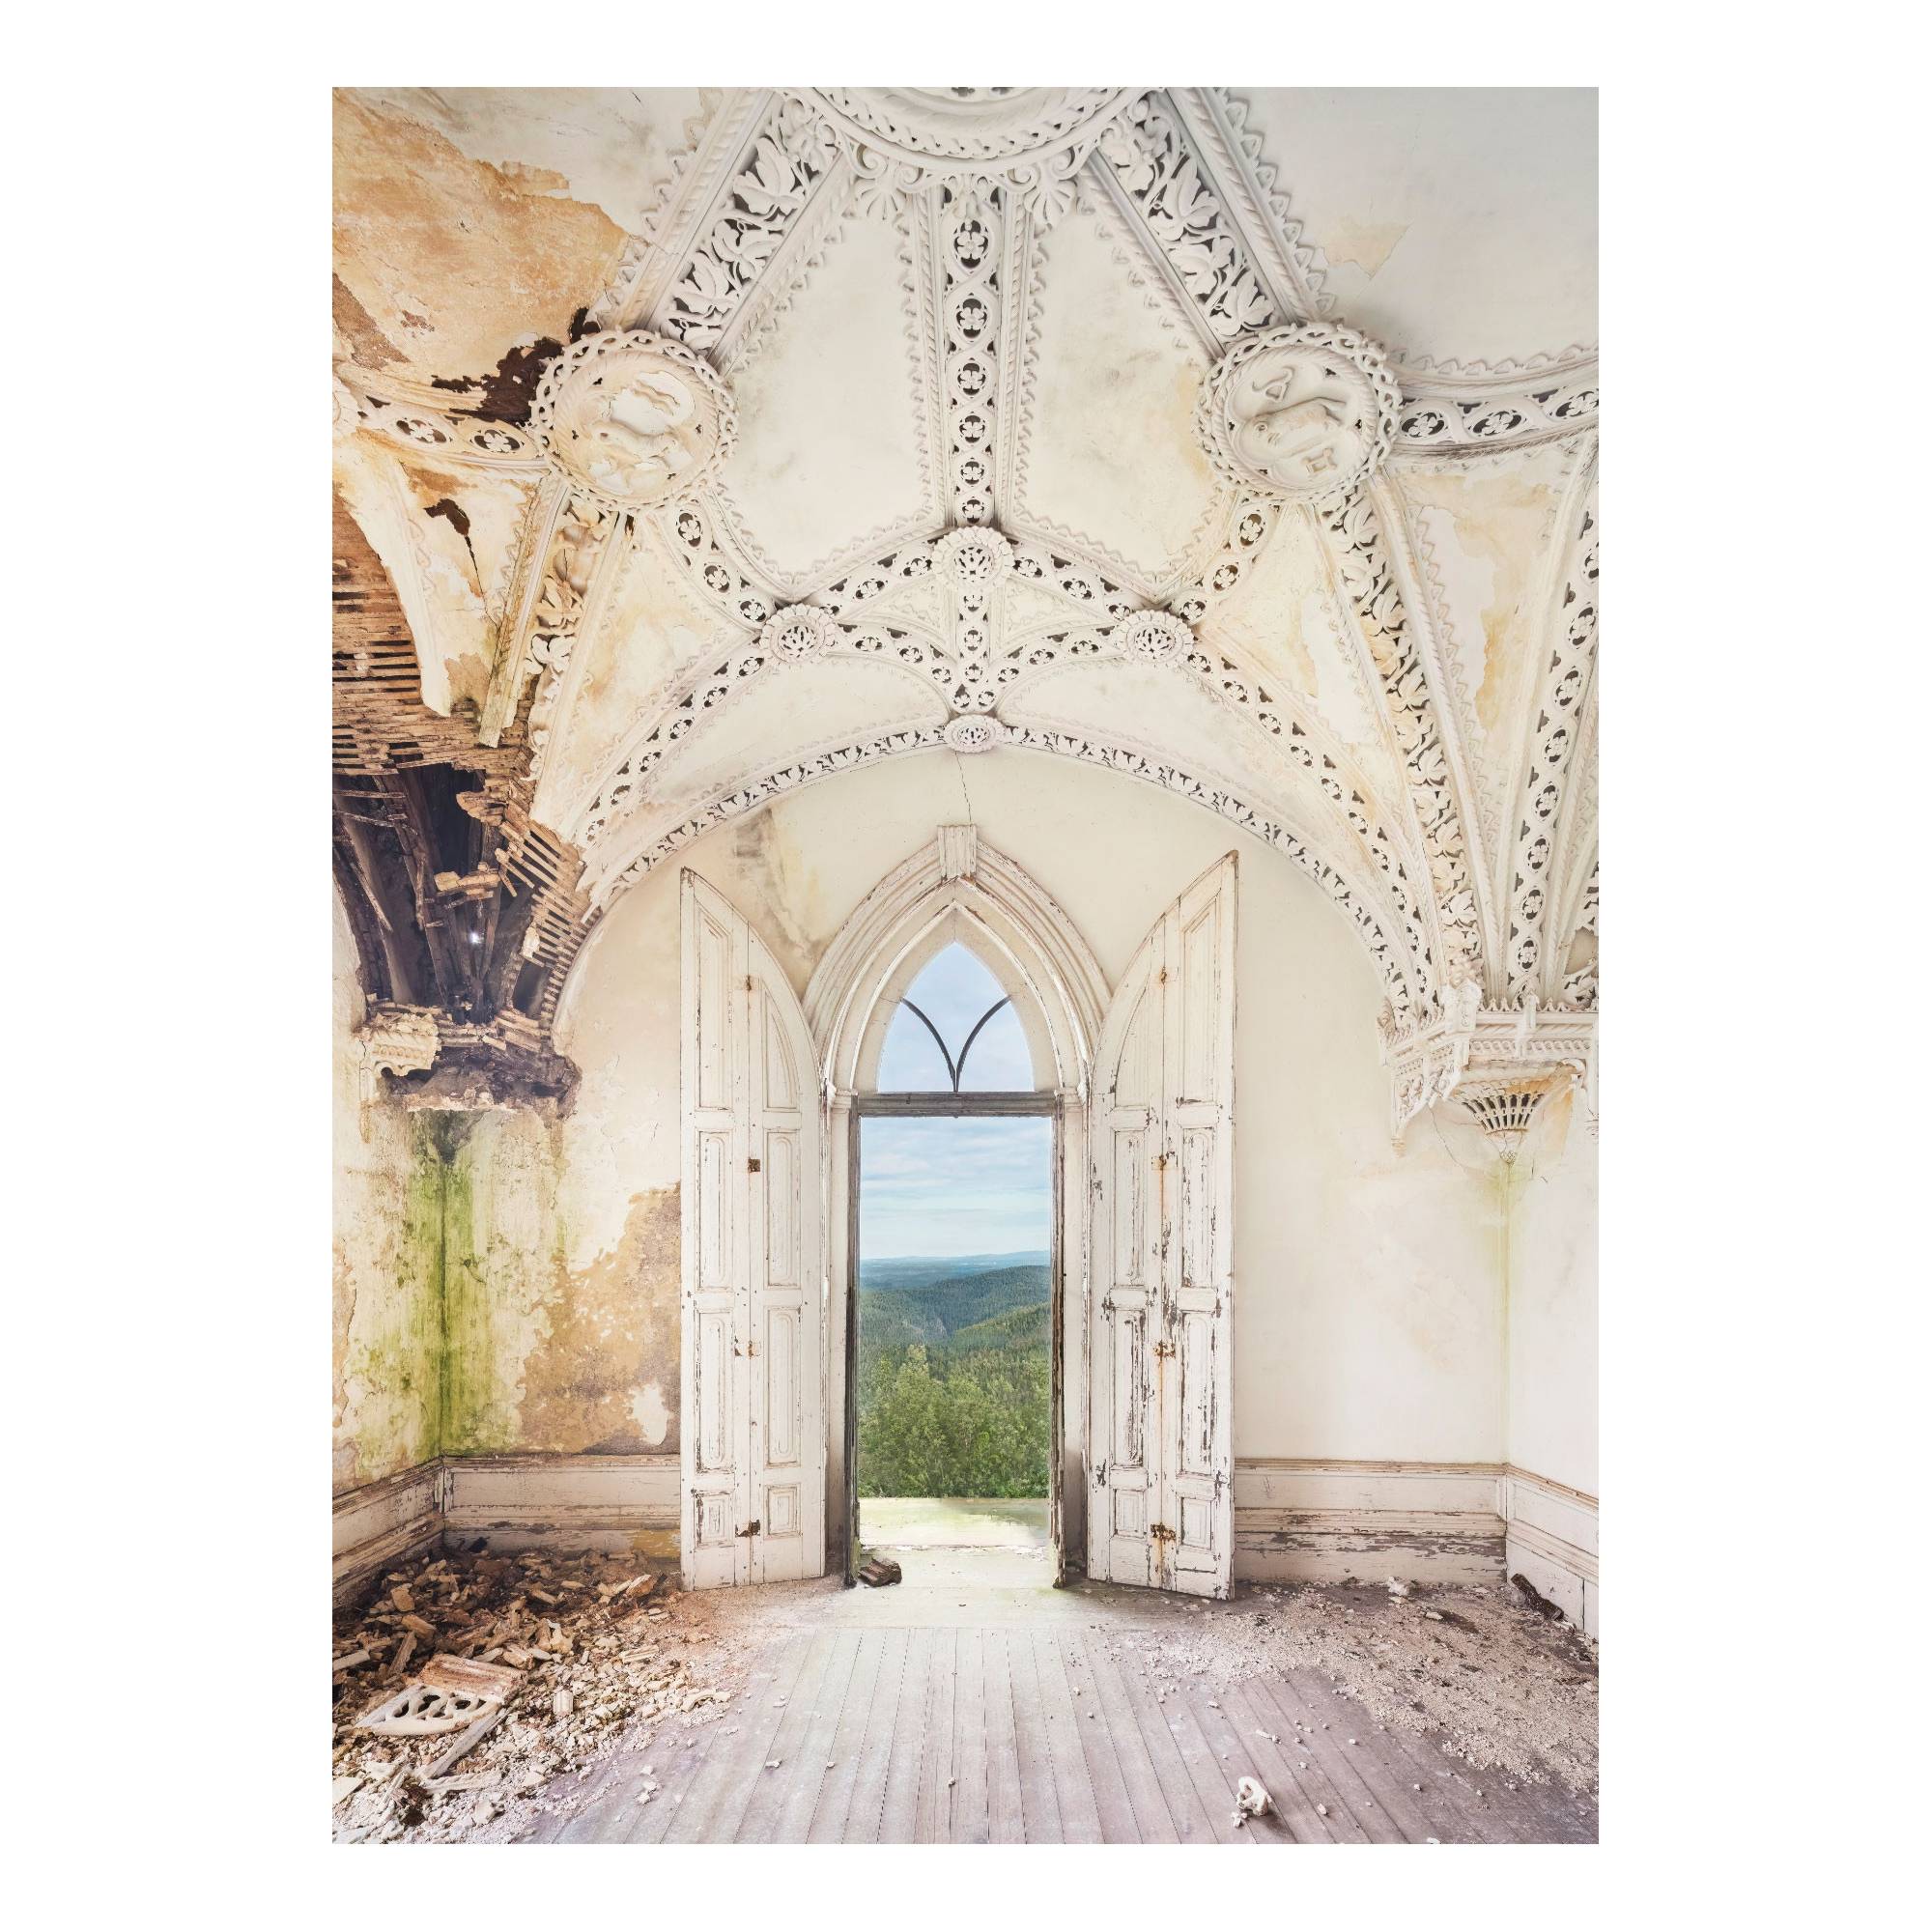 "VICTORIAN VIBES" | Vergessene Villa in Portugal, Lost Place